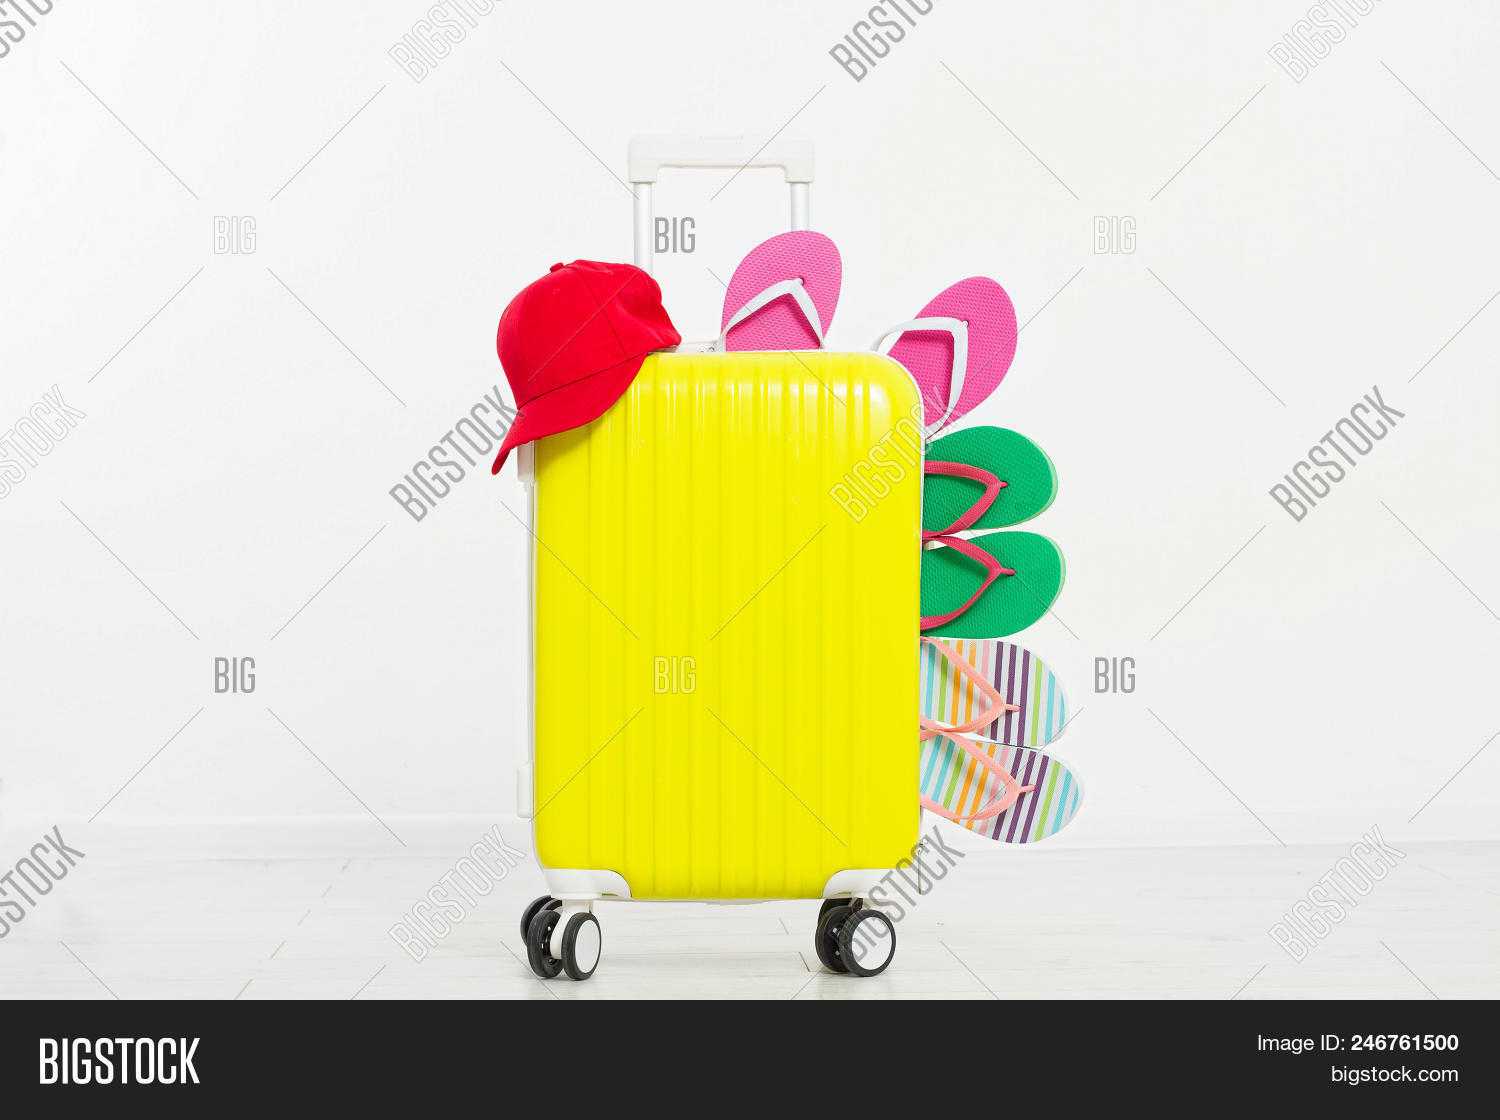 Suitcase Isolated On Image & Photo (Free Trial) | Bigstock Pertaining To Blank Suitcase Template